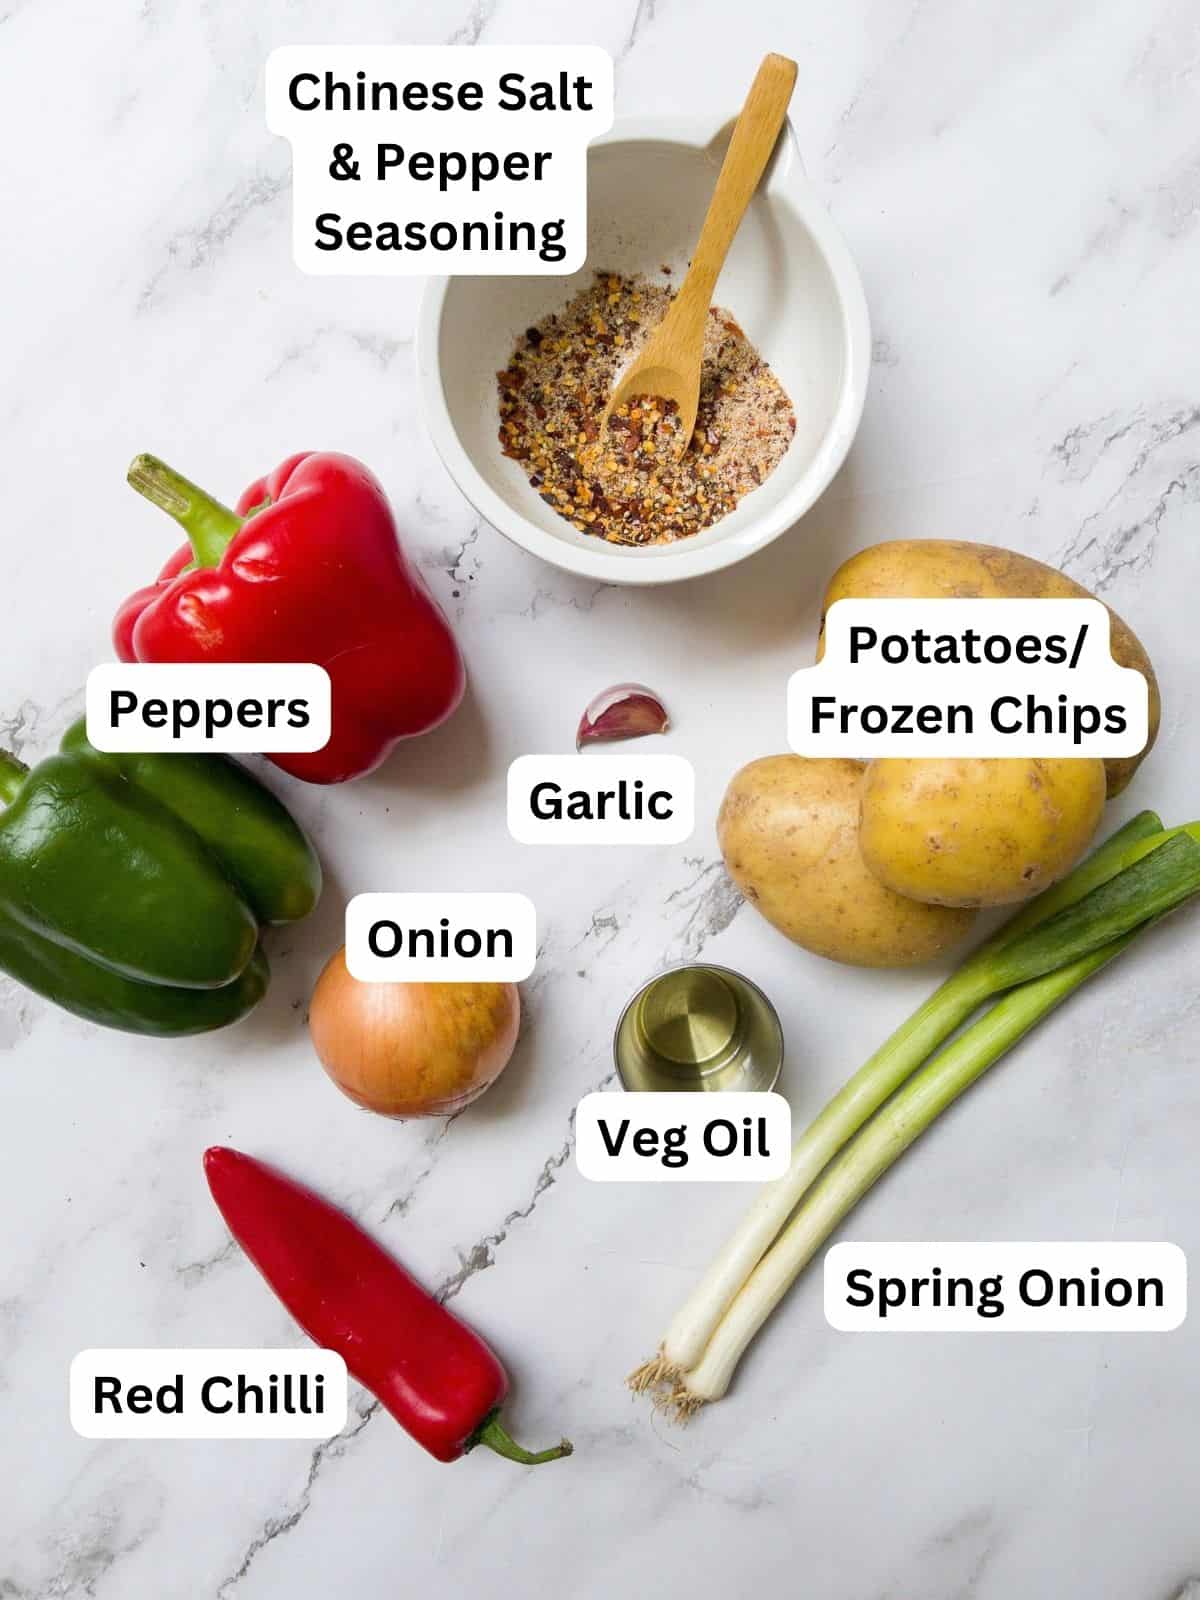 Ingredients laid out for chinese salt & pepper chips.